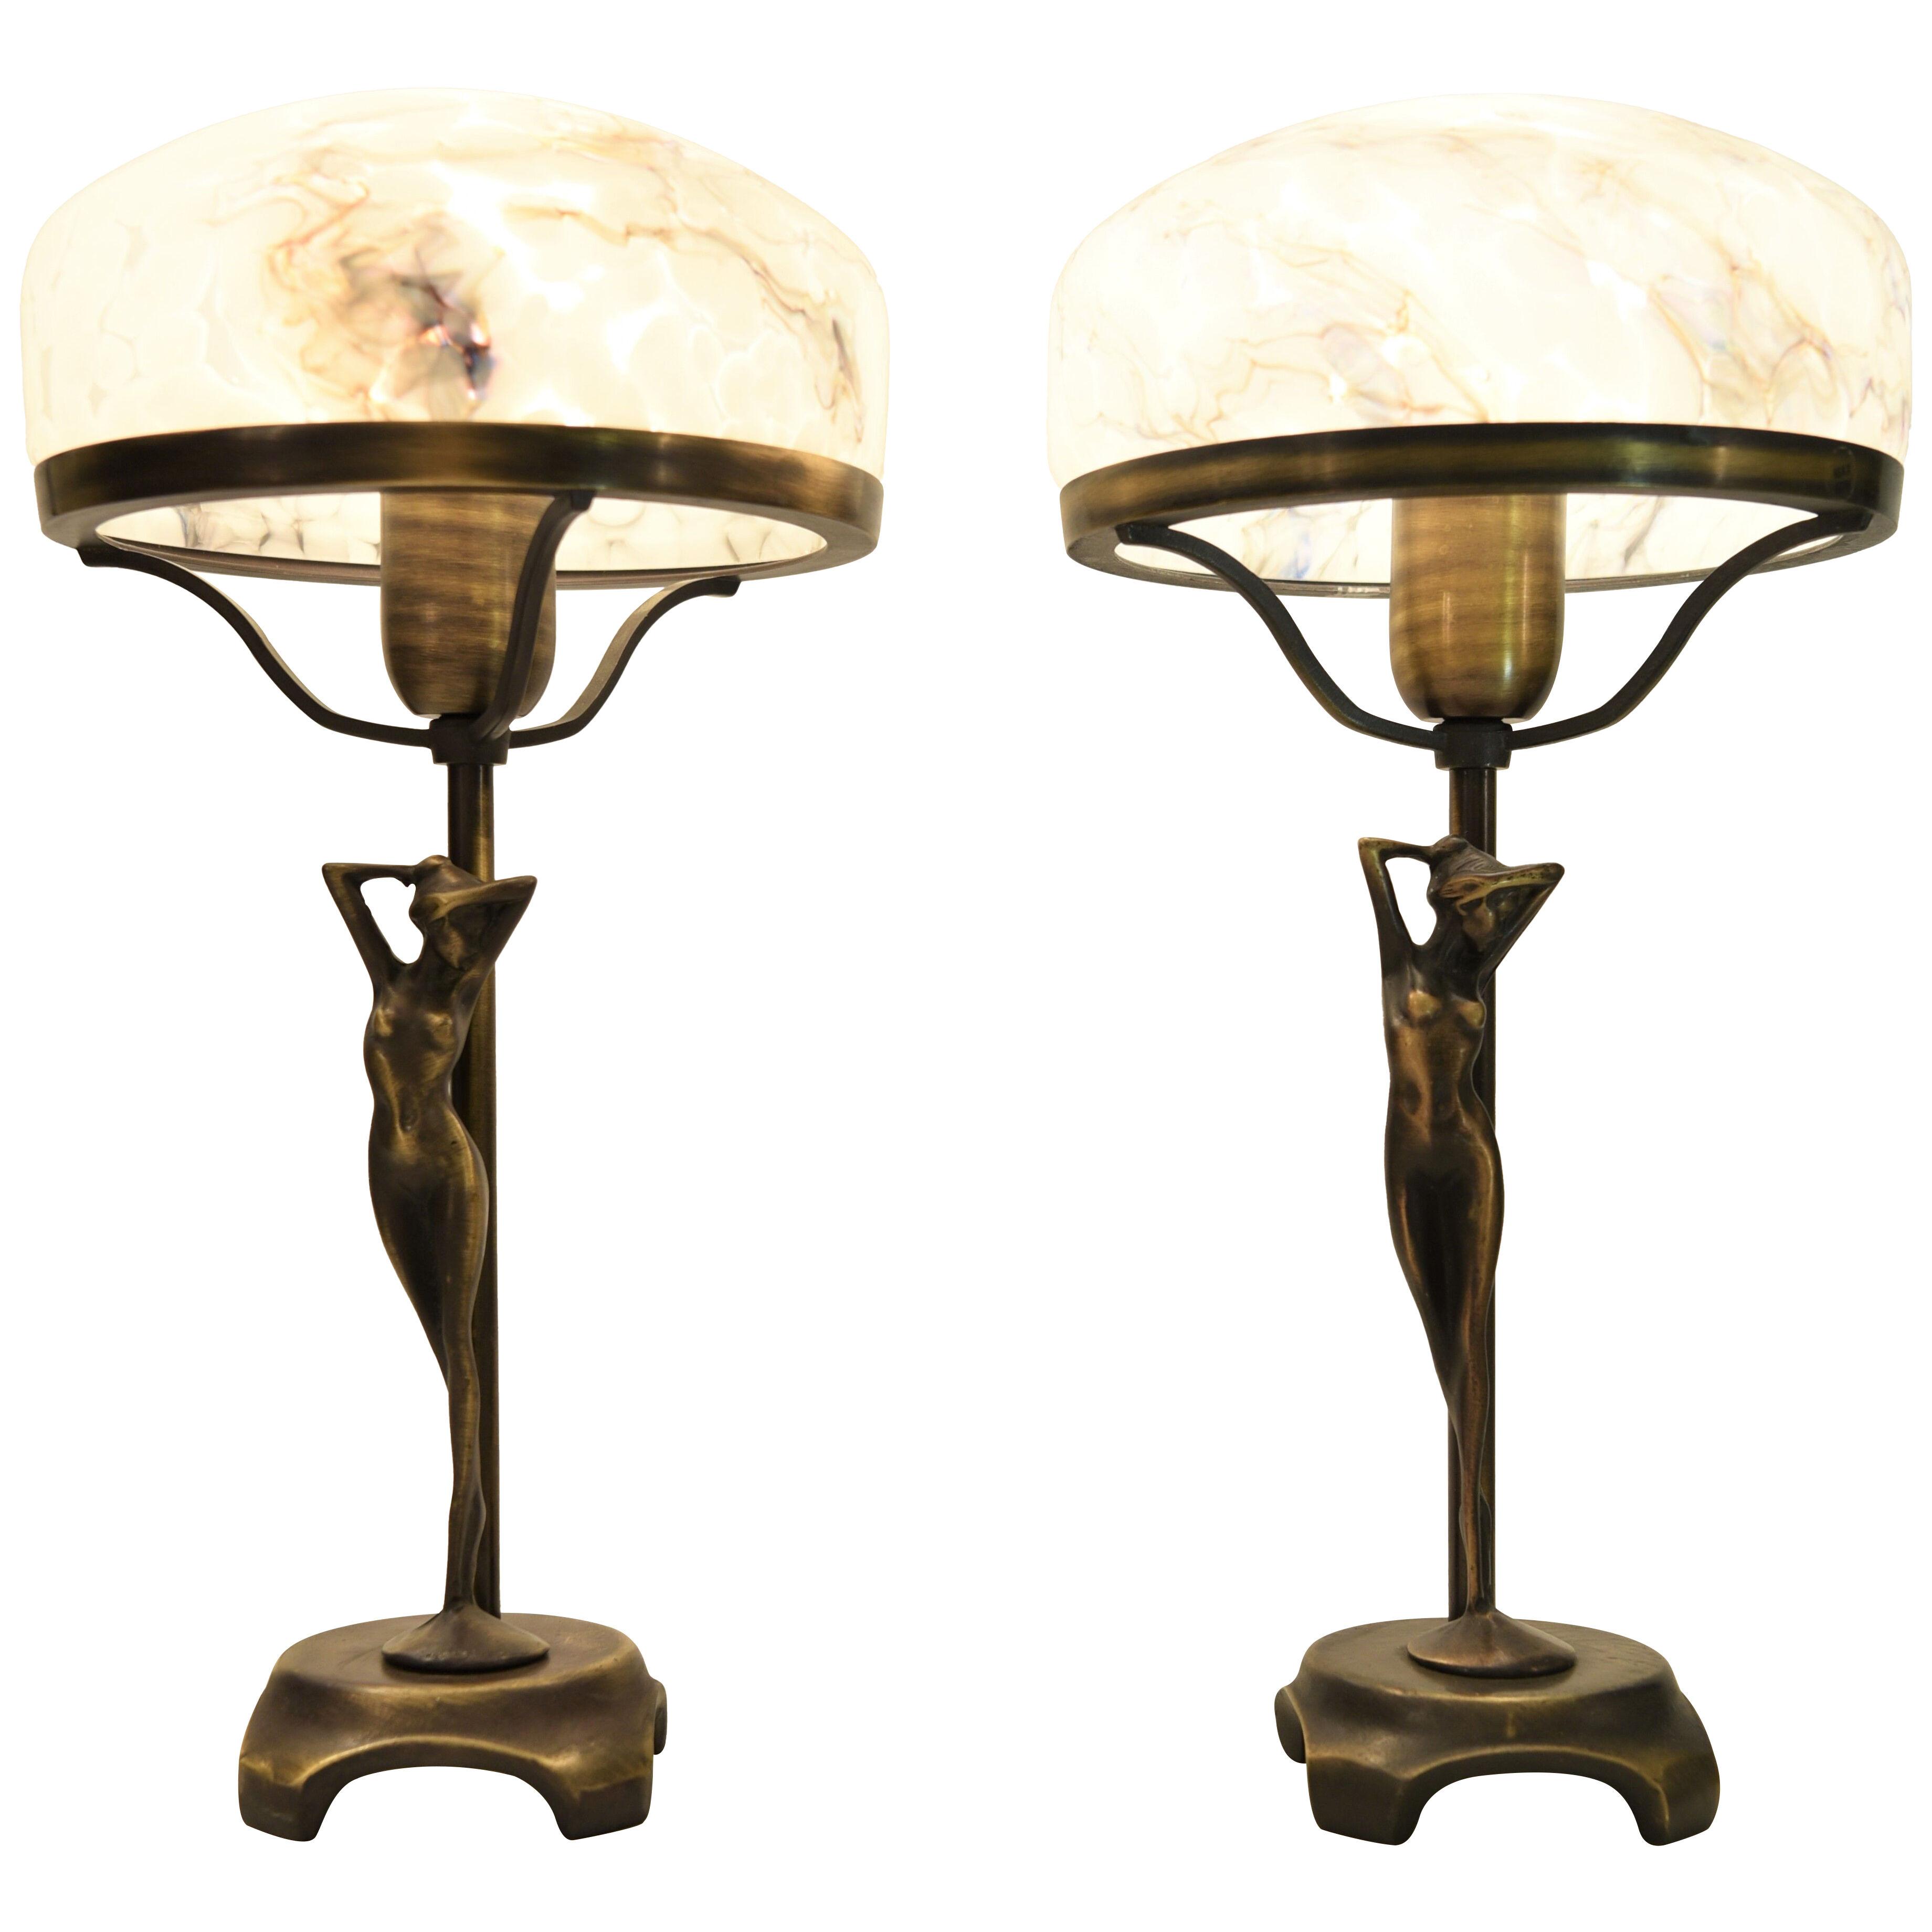 Pair Rare Bronze Art Nouveau Style Table Lamps Made by Ateljé Lyktan, Sweden.